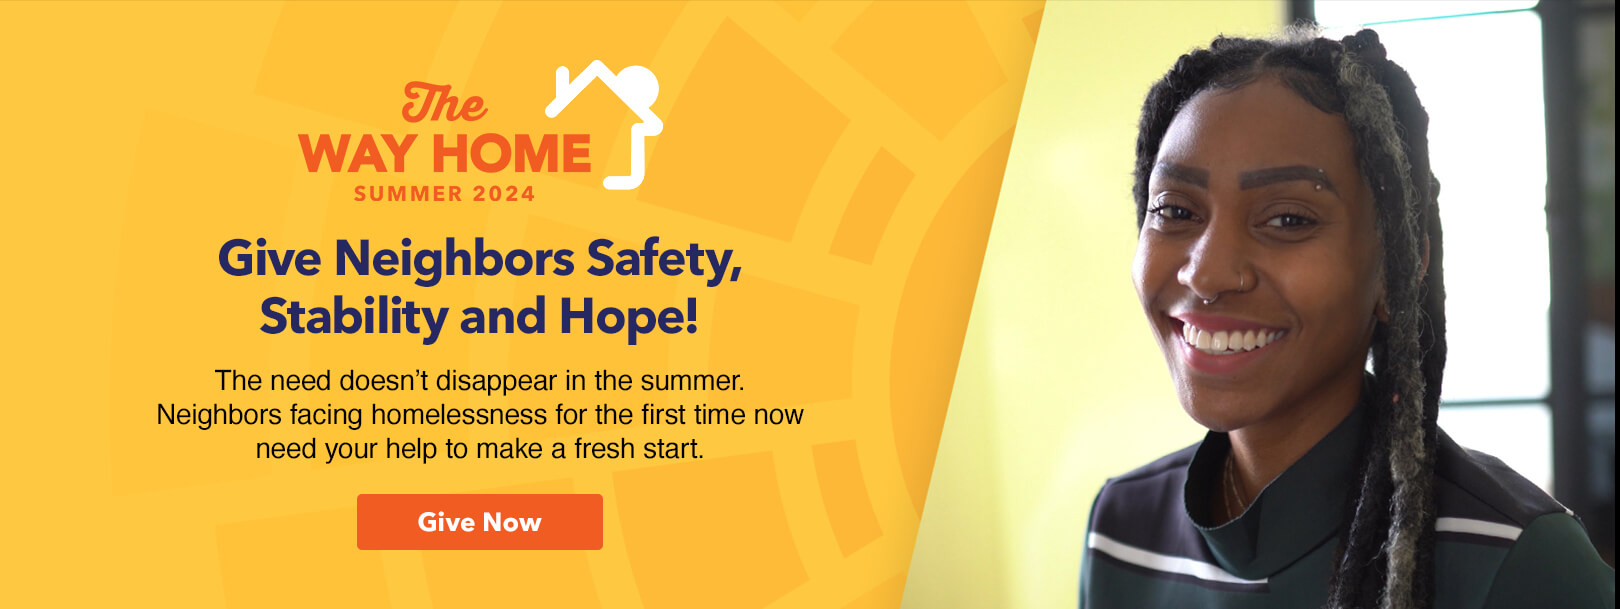 The WAY HOME Summer 2024 | Give Neighbors Safety, Stability and Hope! | The need doesn't disappear in the summer. Neighbors facing homelessness for the first time now need your help to make a fresh start.